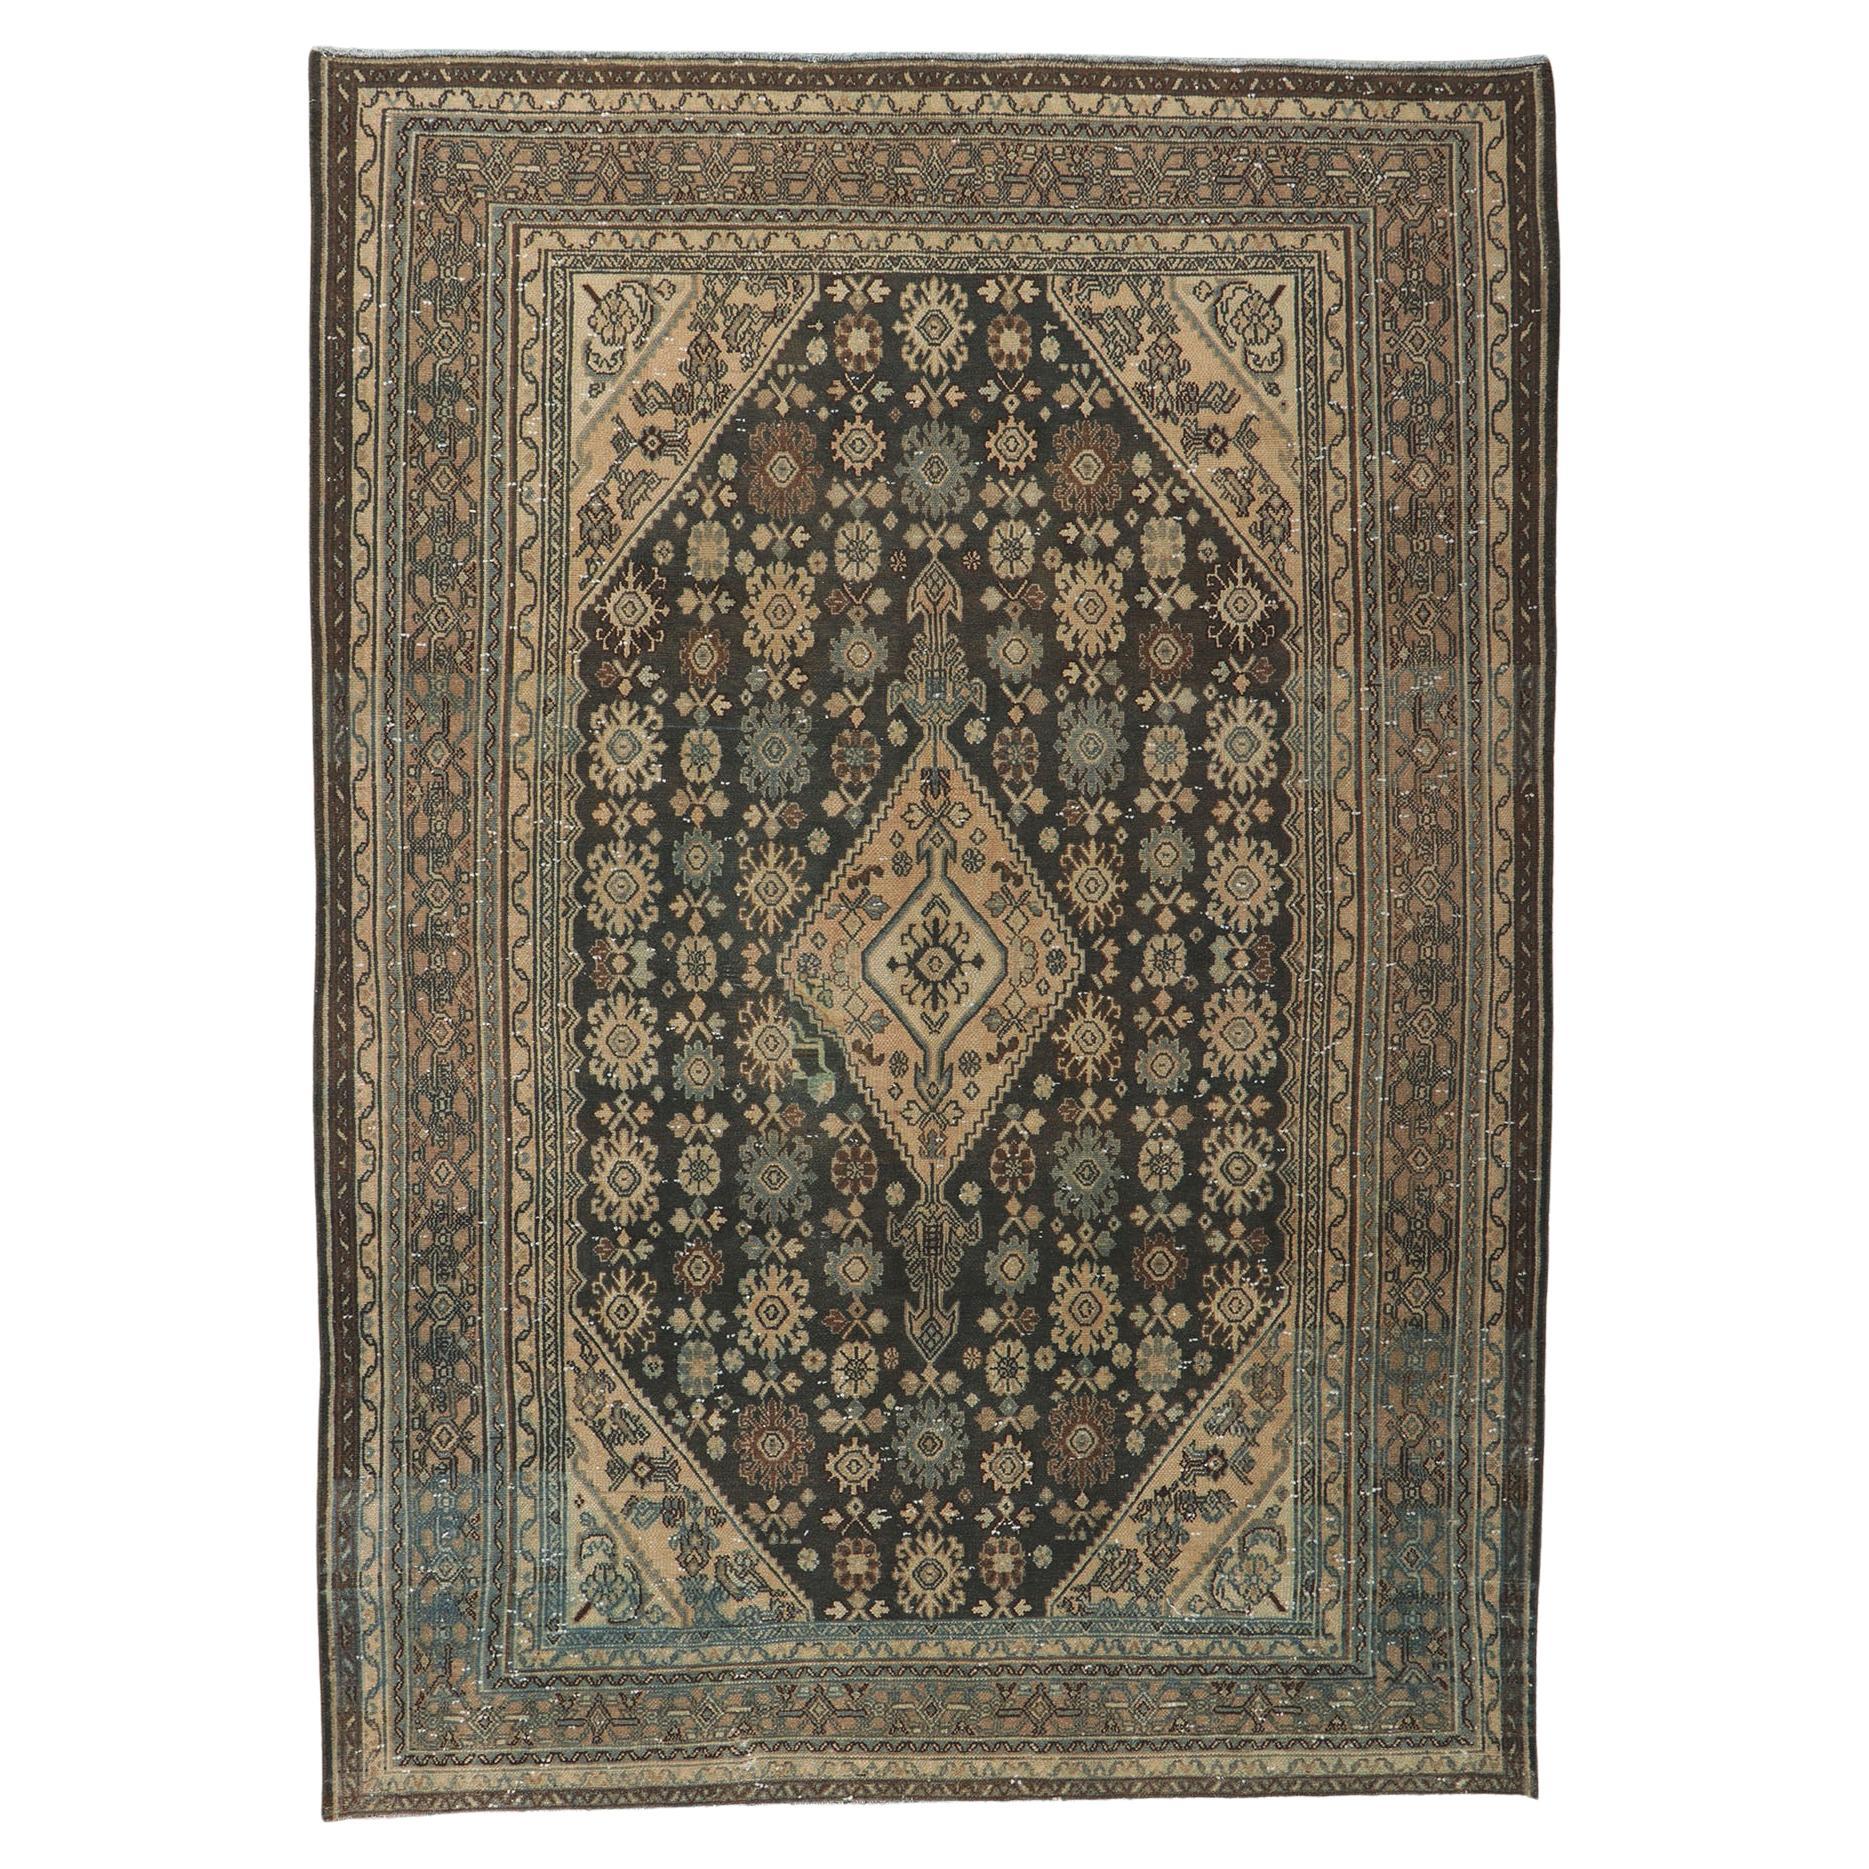 Distressed Vintage Persian Hamadan Rug, Luxury Lodge Meets Relaxed Refinement